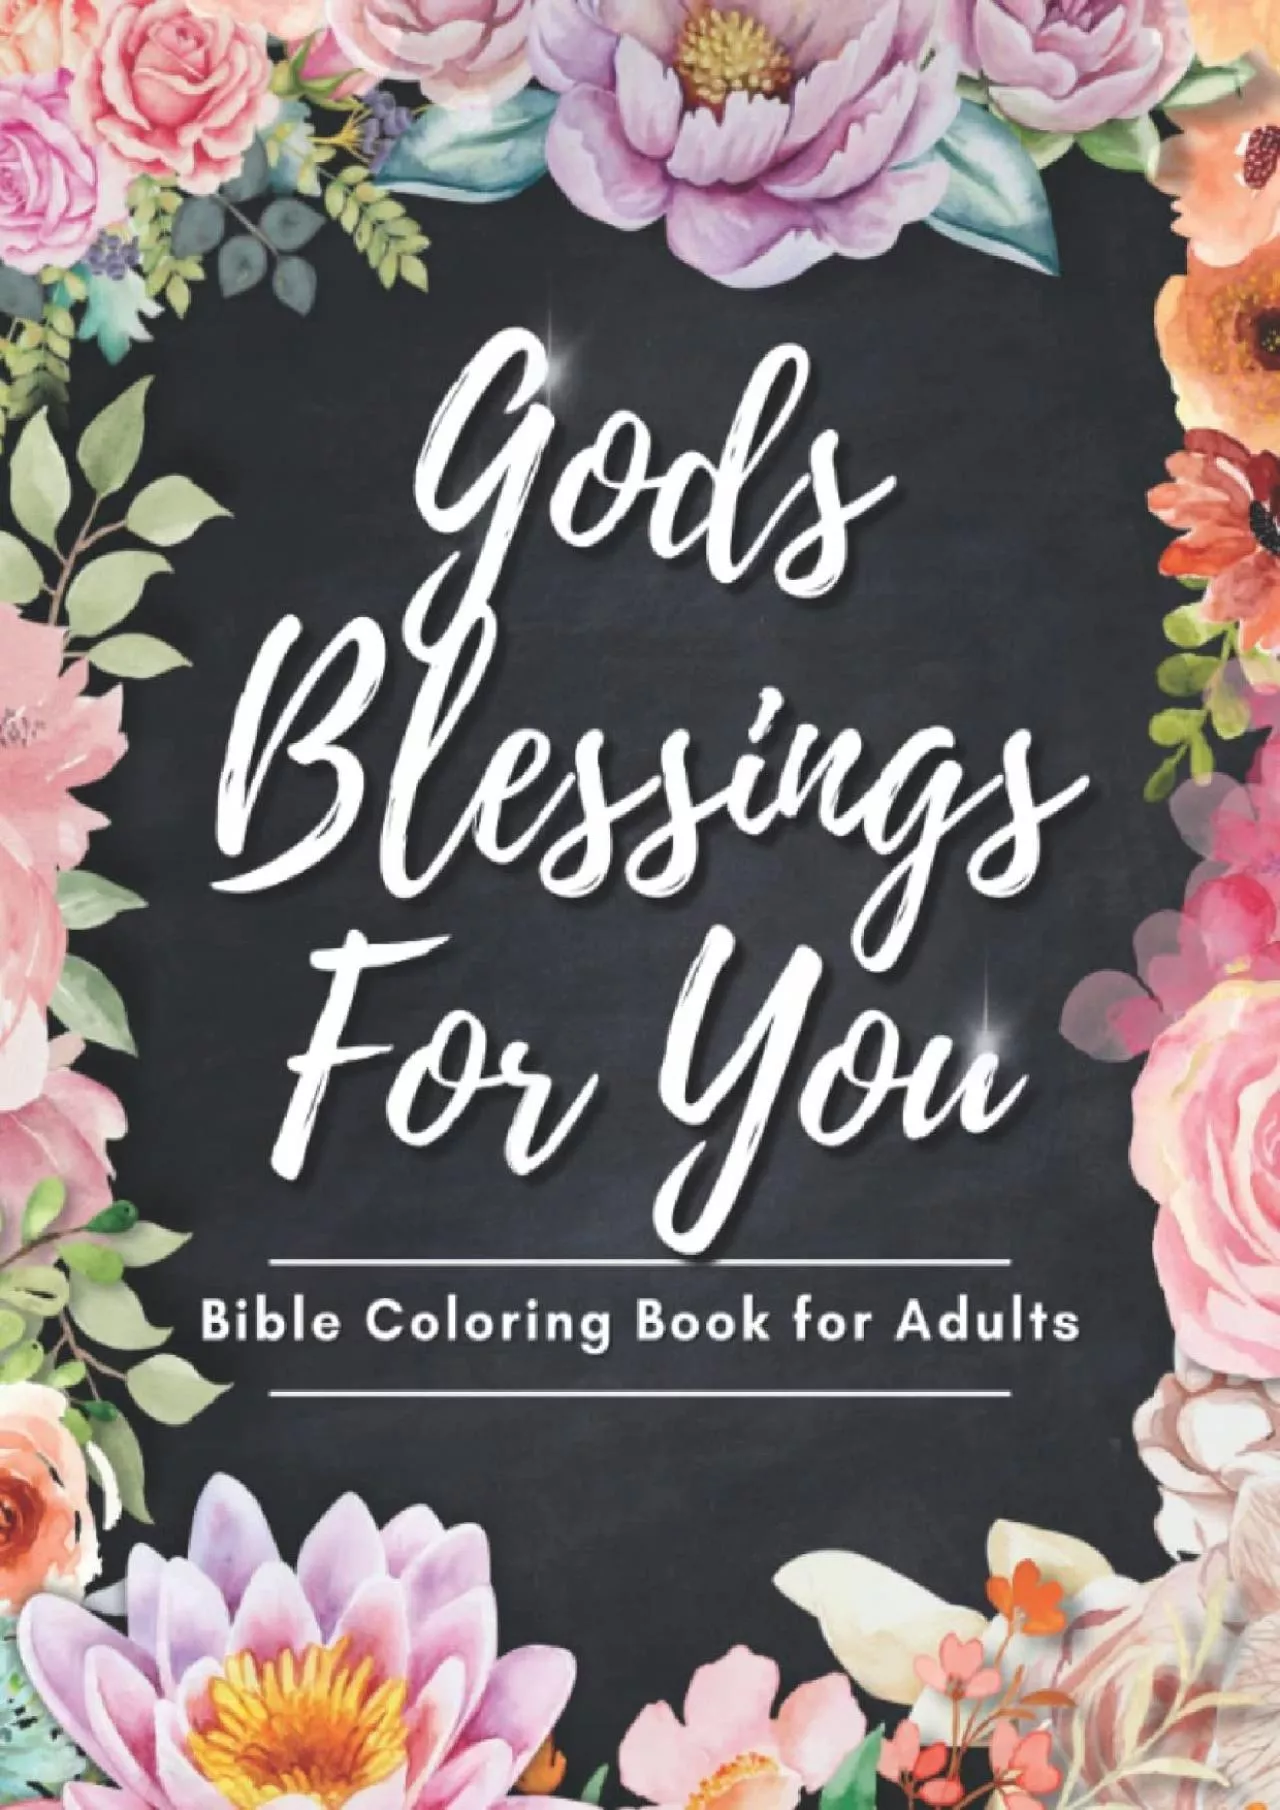 [DOWLOAD]-Bible Coloring Book For Adults Gods Blessings for You, Bible Verse Coloring